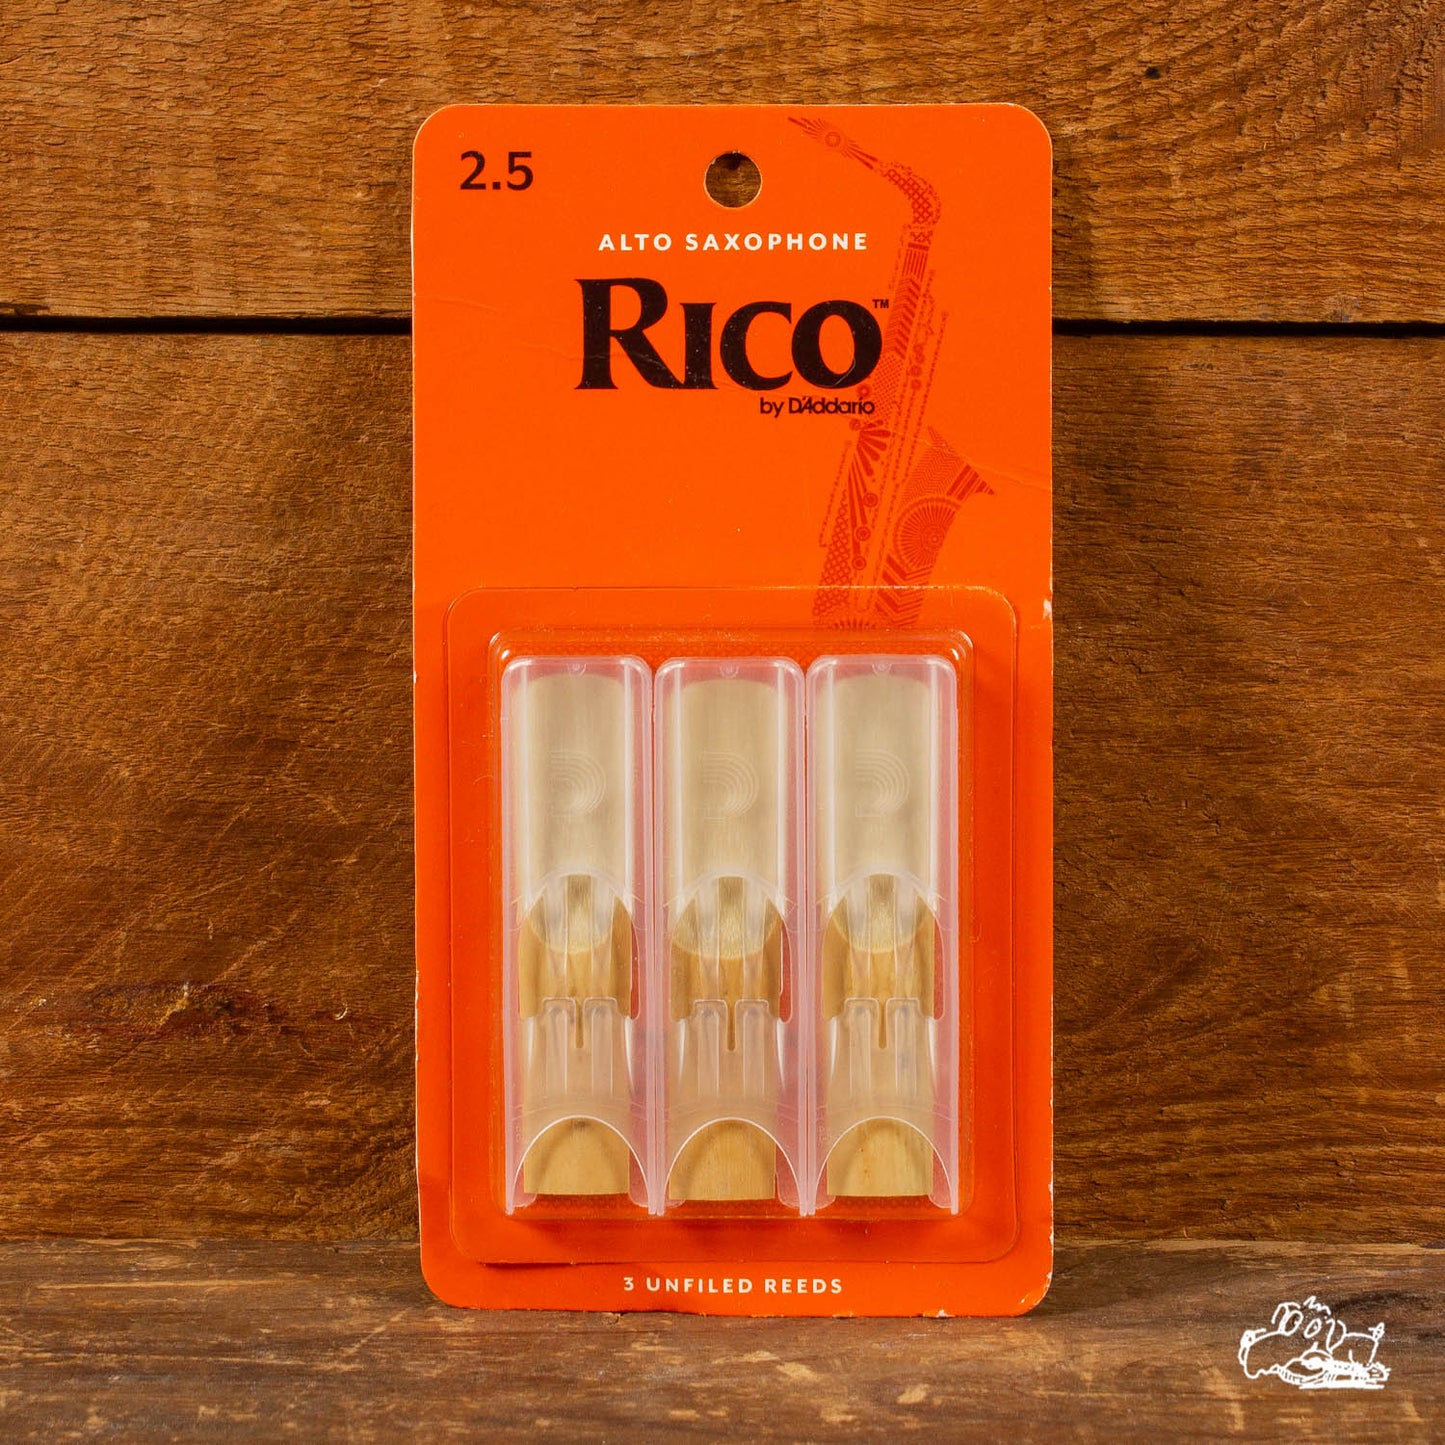 Rico by D'Addario - Unfiled Alto Saxophone Reeds - Pack of 3 - Choose from 1.5, 2.0, or 2.5